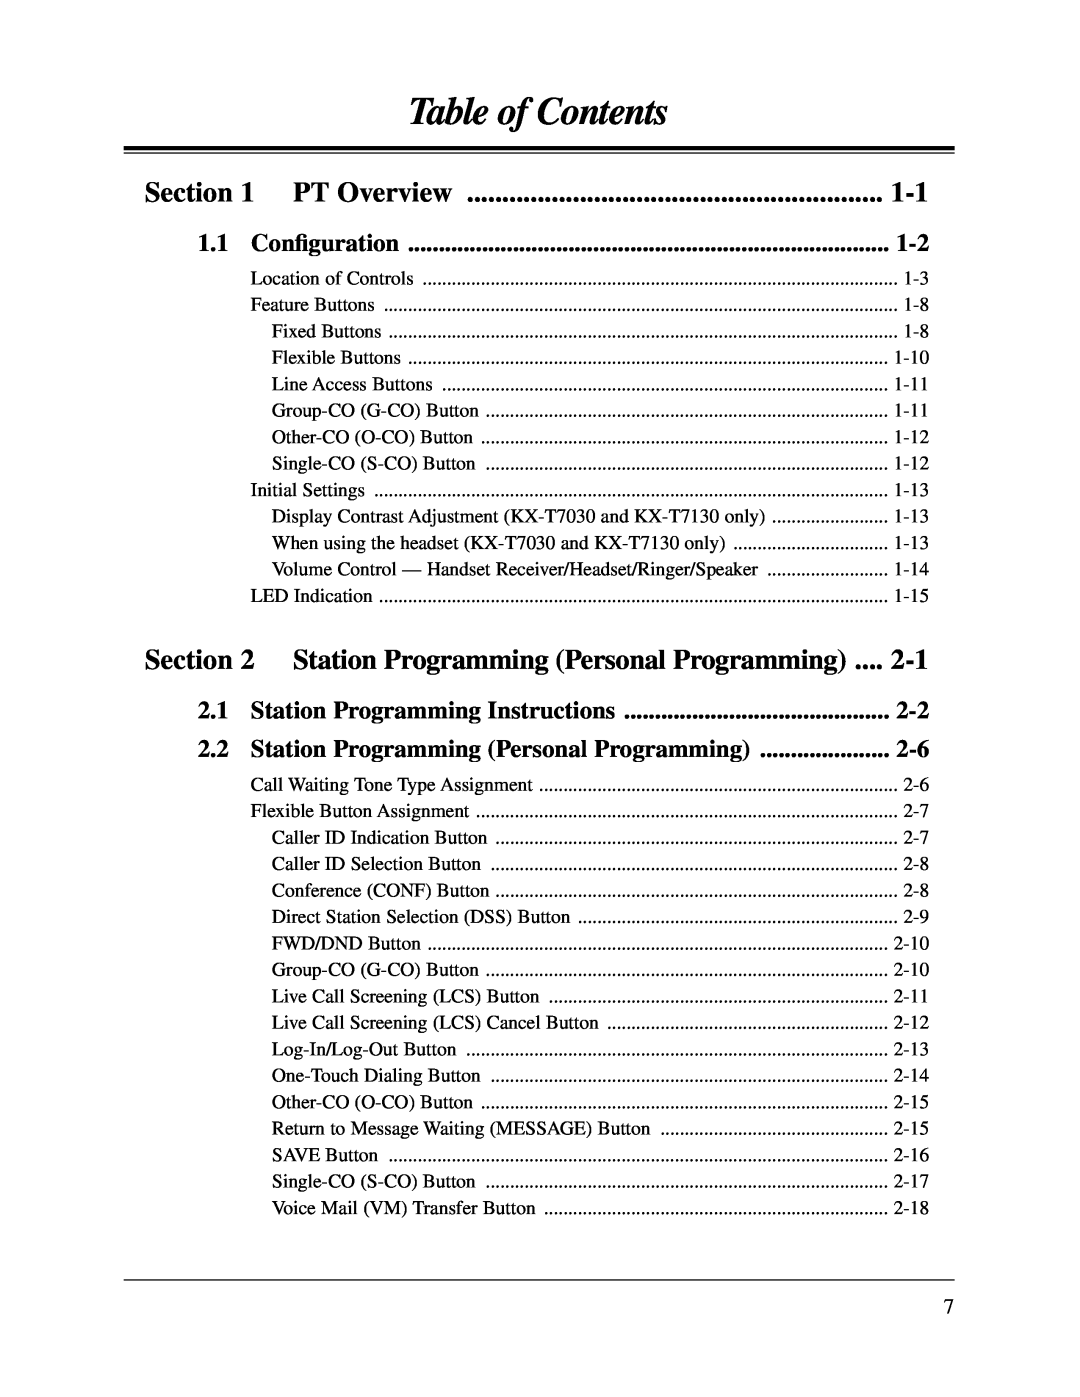 Panasonic KX-TA624 Table of Contents, Section, PT Overview, 1.1 Conﬁguration, Station Programming Personal Programming 